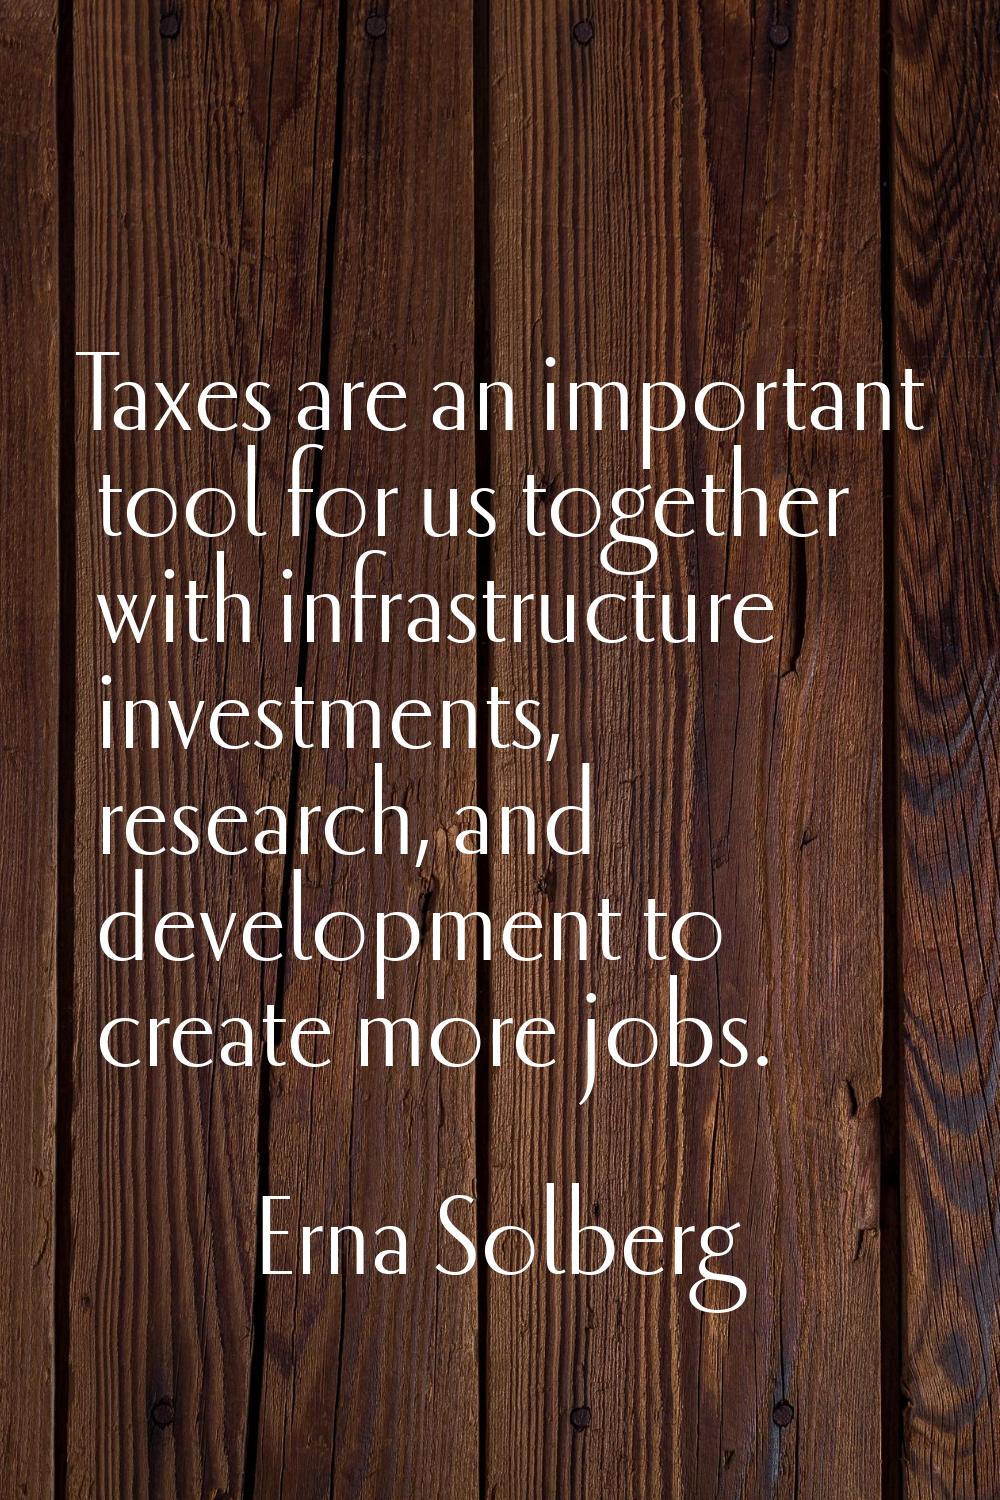 Taxes are an important tool for us together with infrastructure investments, research, and developm